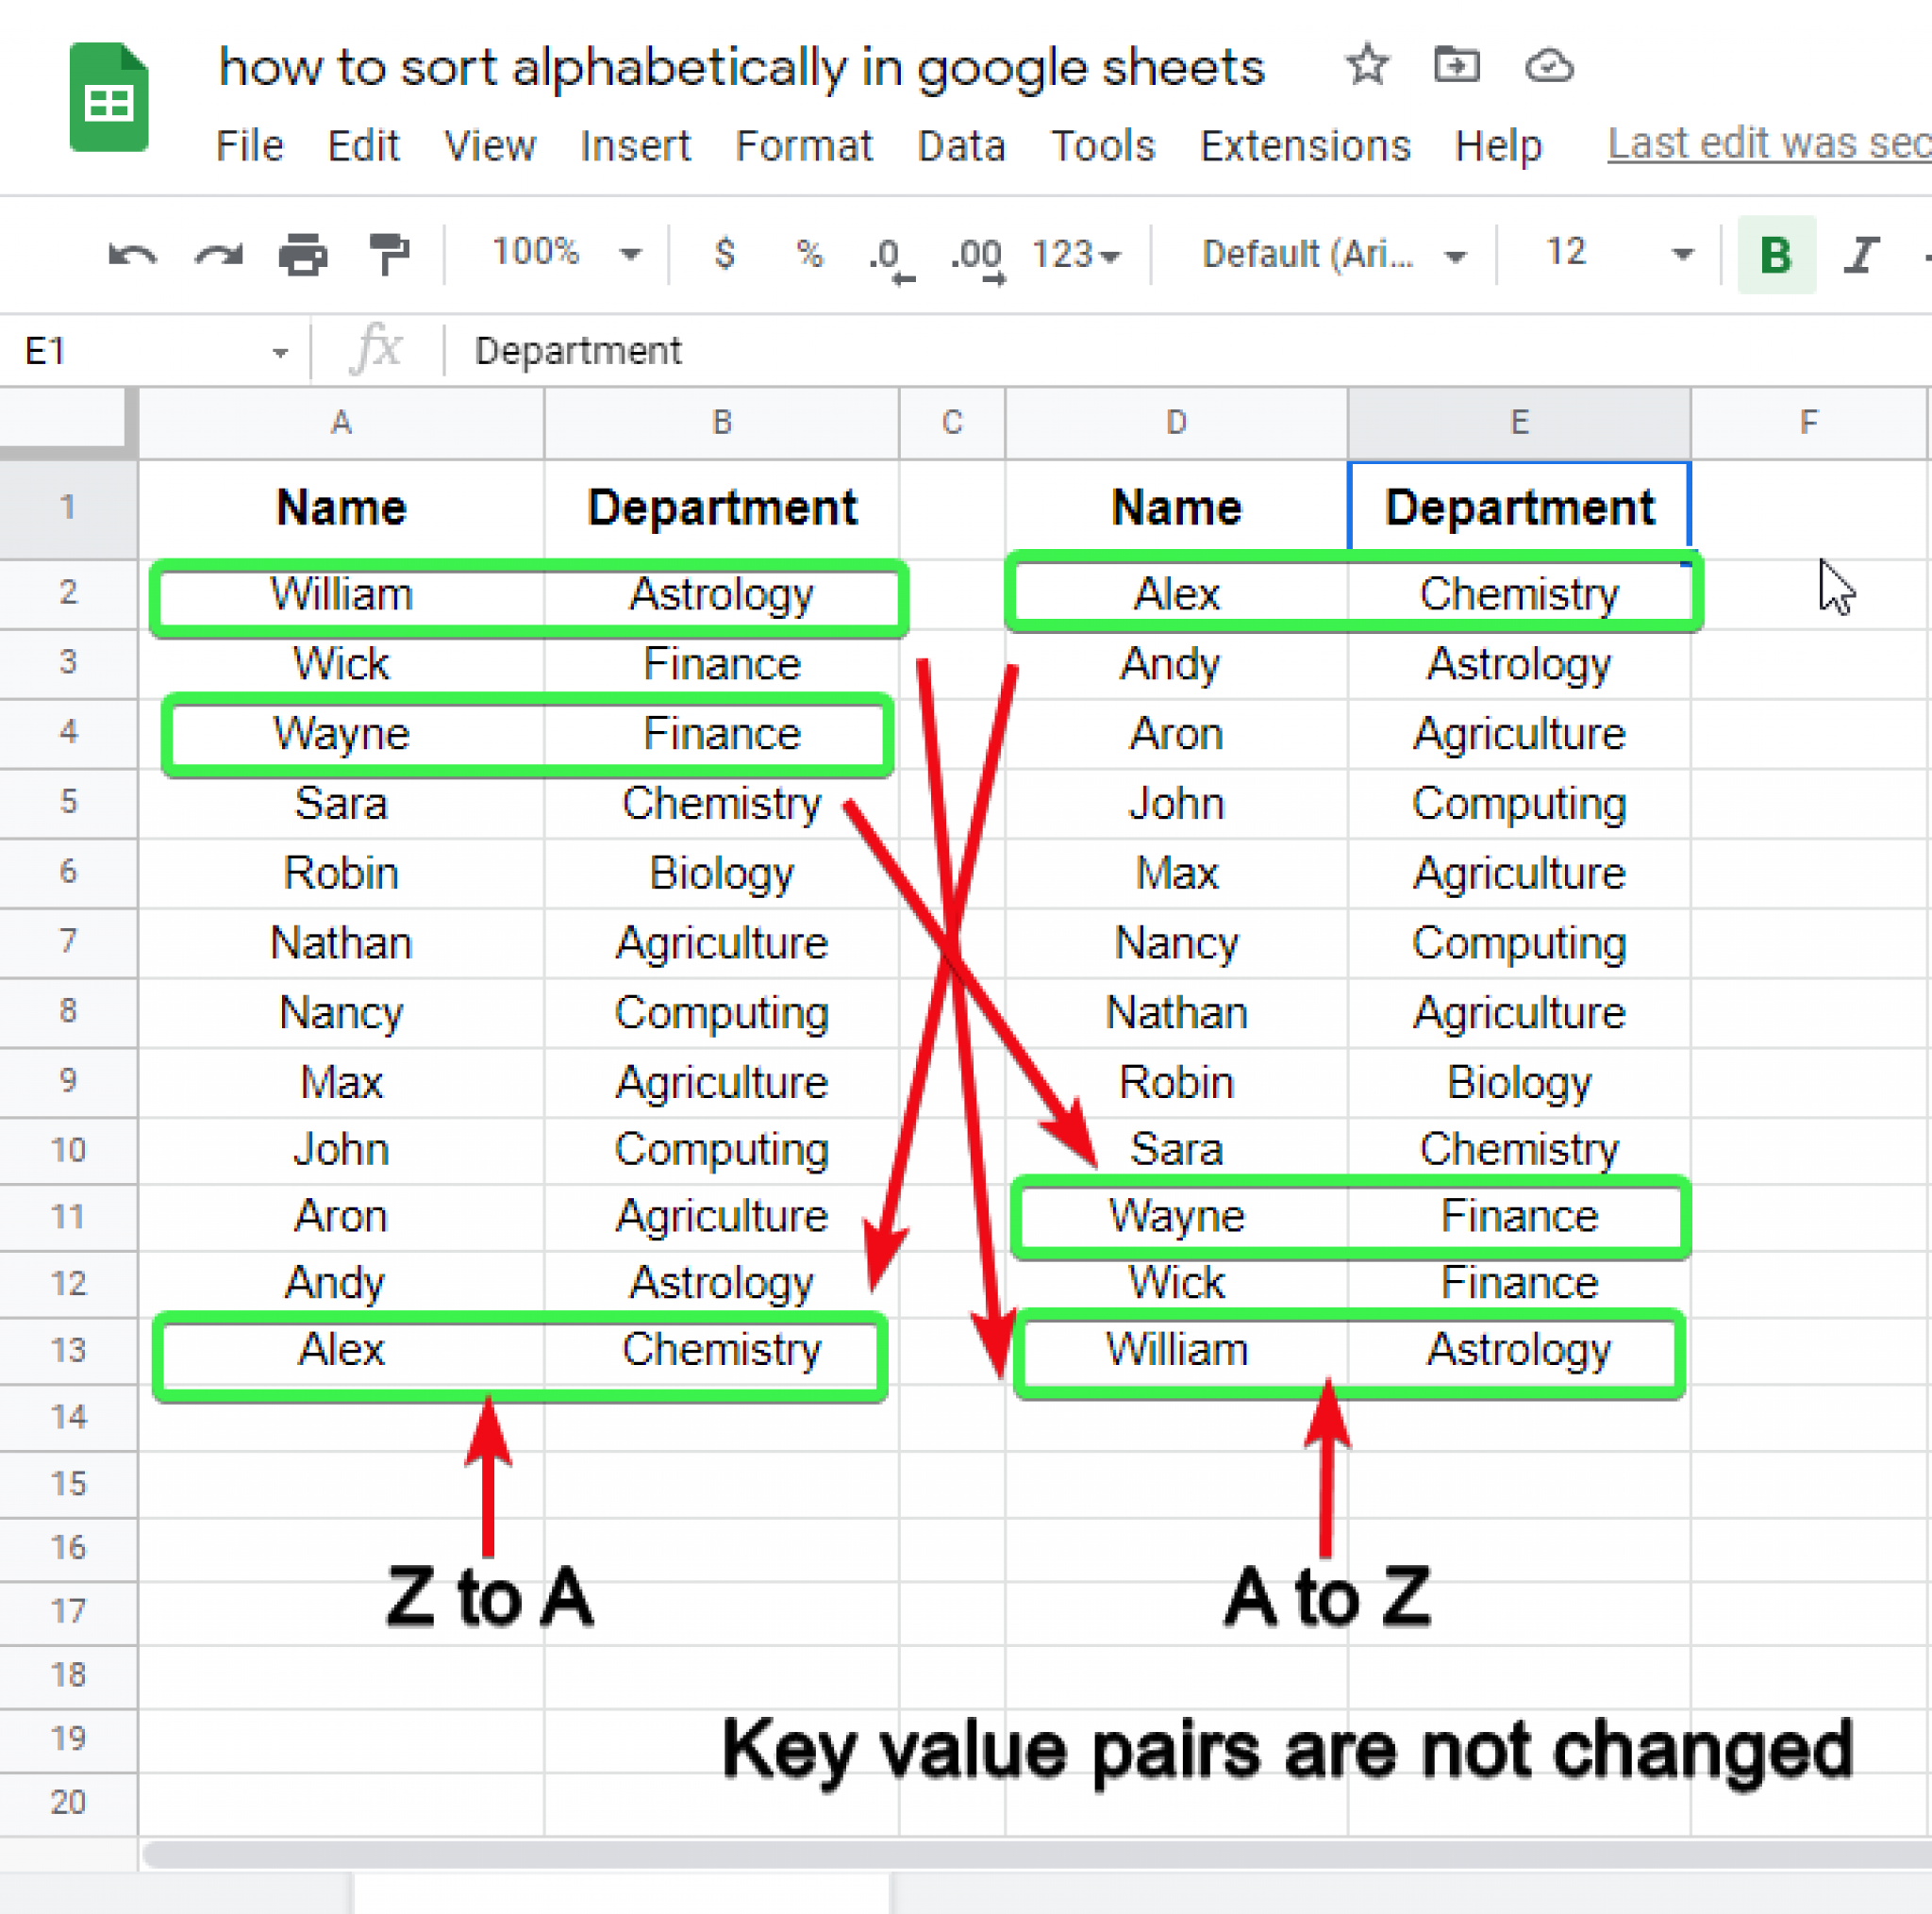 how-to-sort-alphabetically-in-google-sheets-a-z-or-z-a